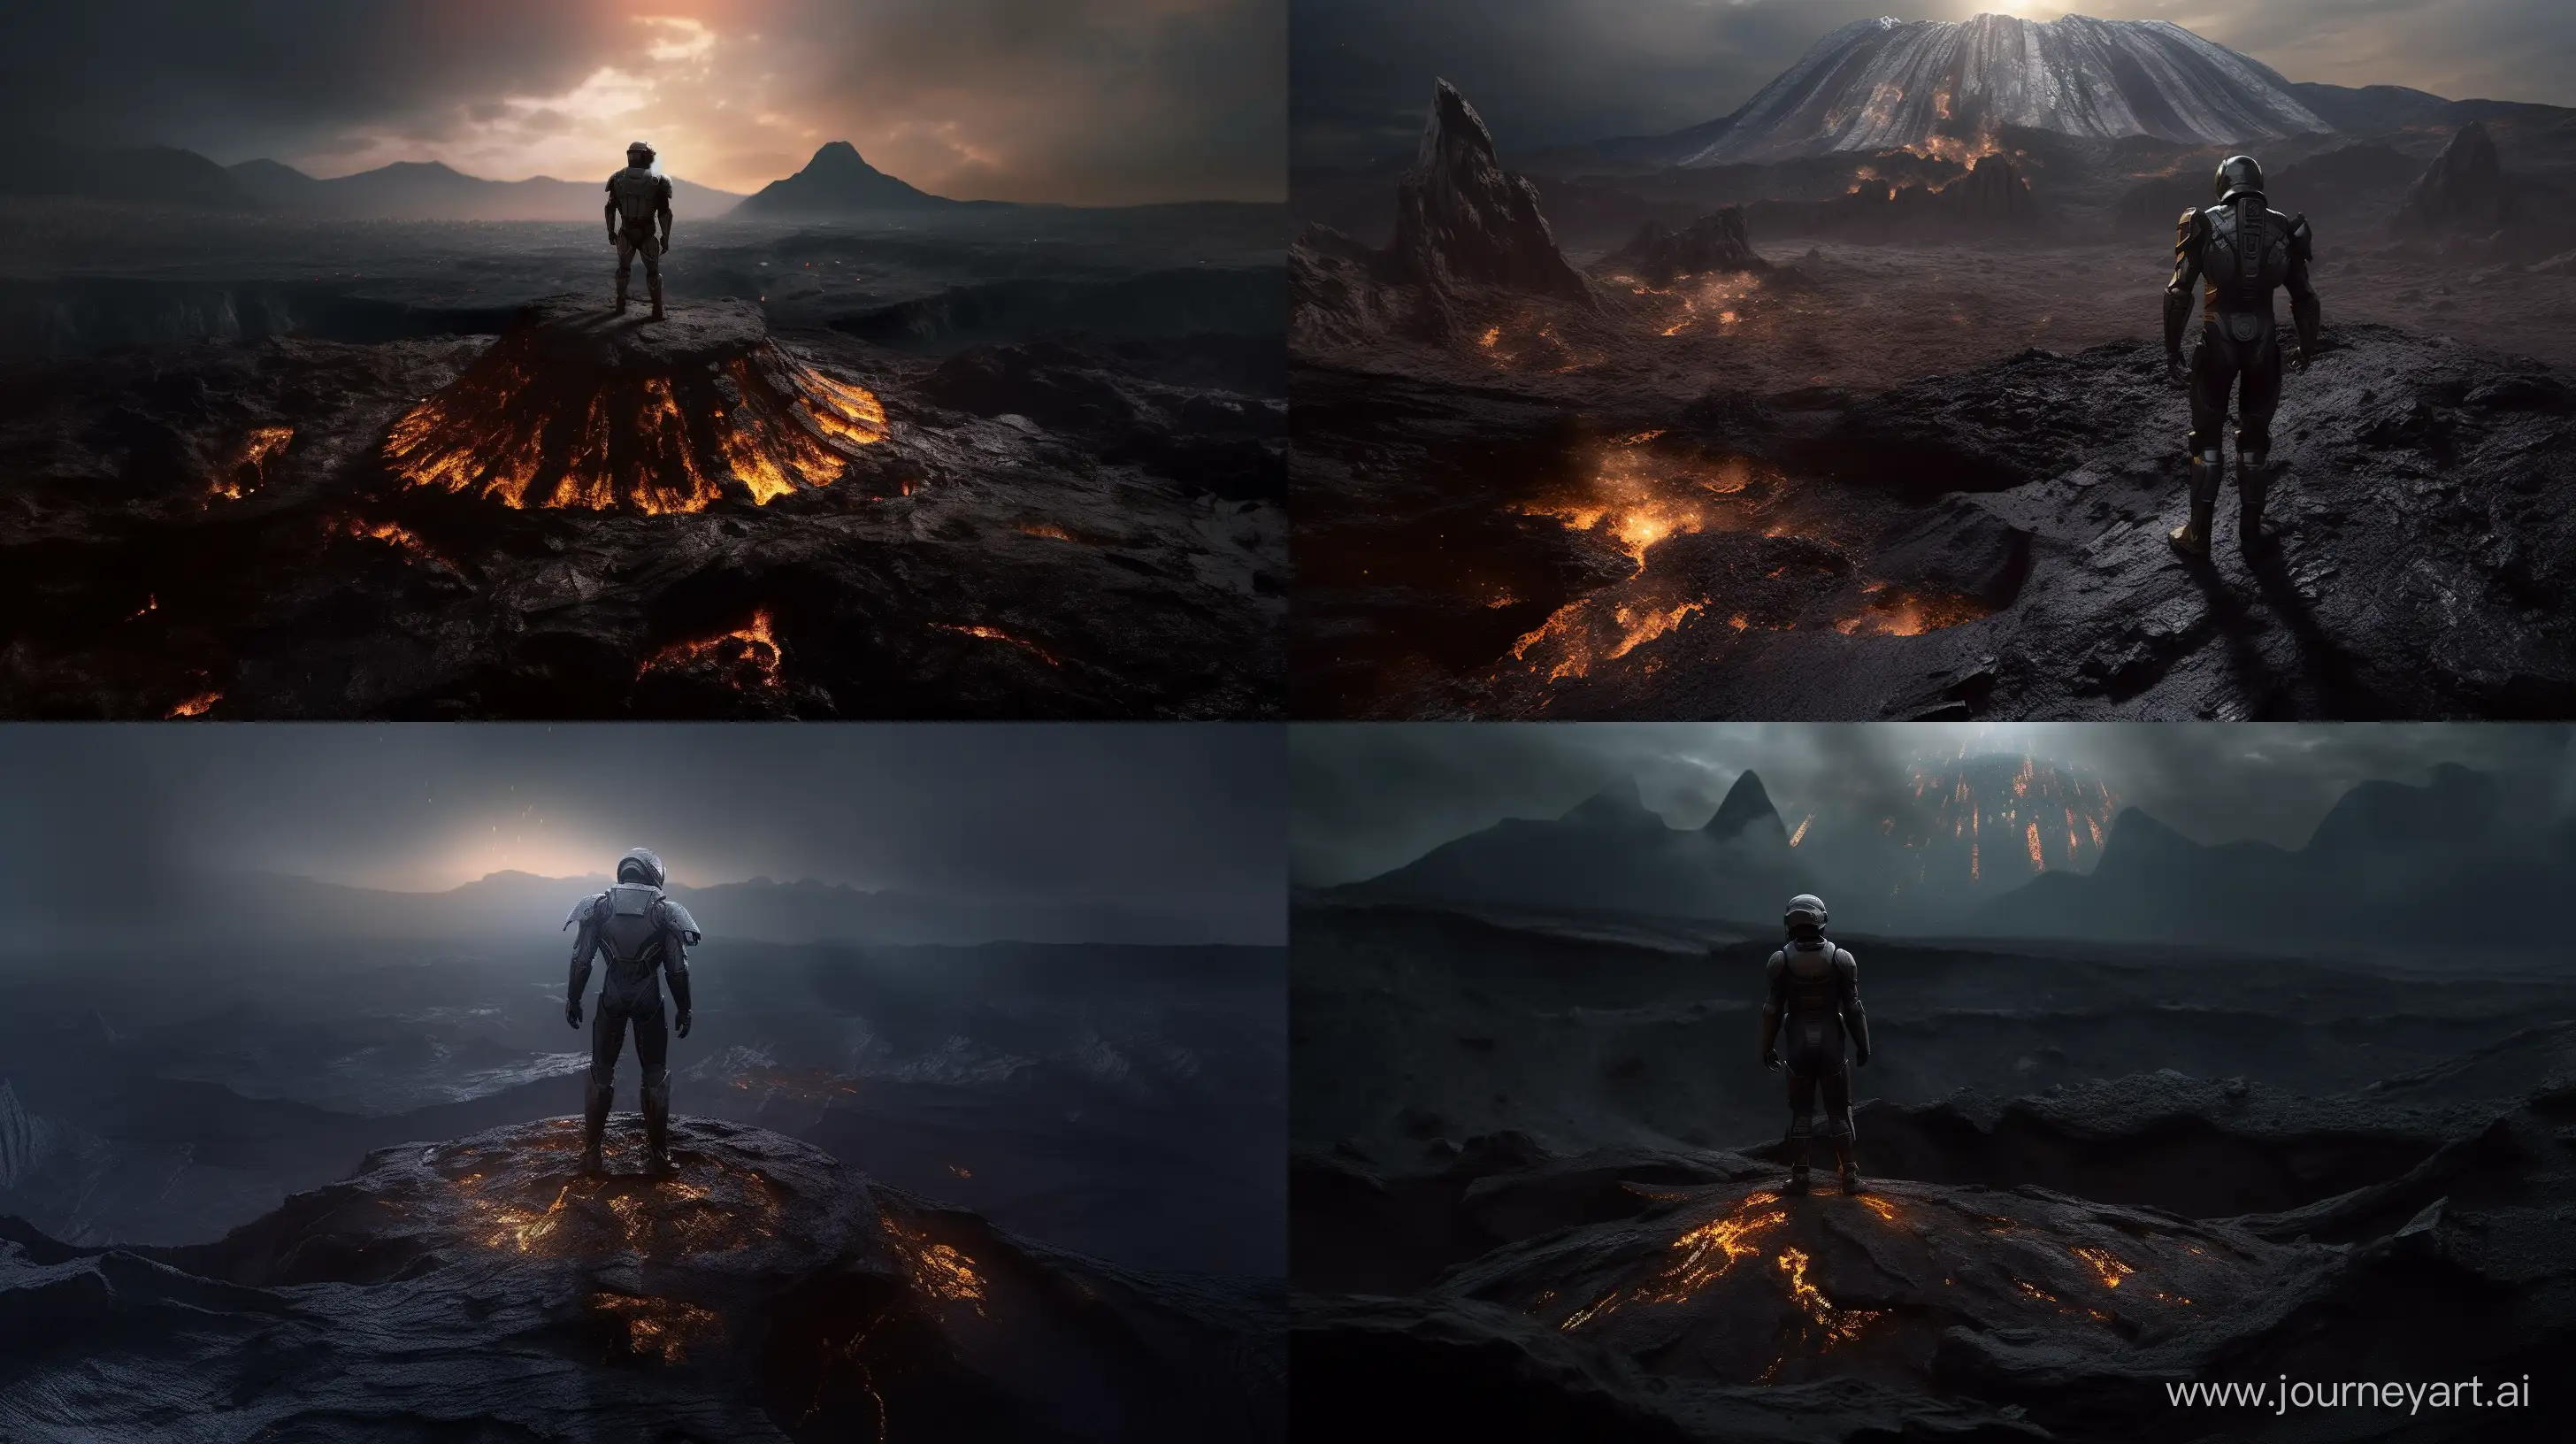 Master-Chief-Heroism-Epic-Star-Trek-Landscape-with-Ancient-Volcanic-Crater